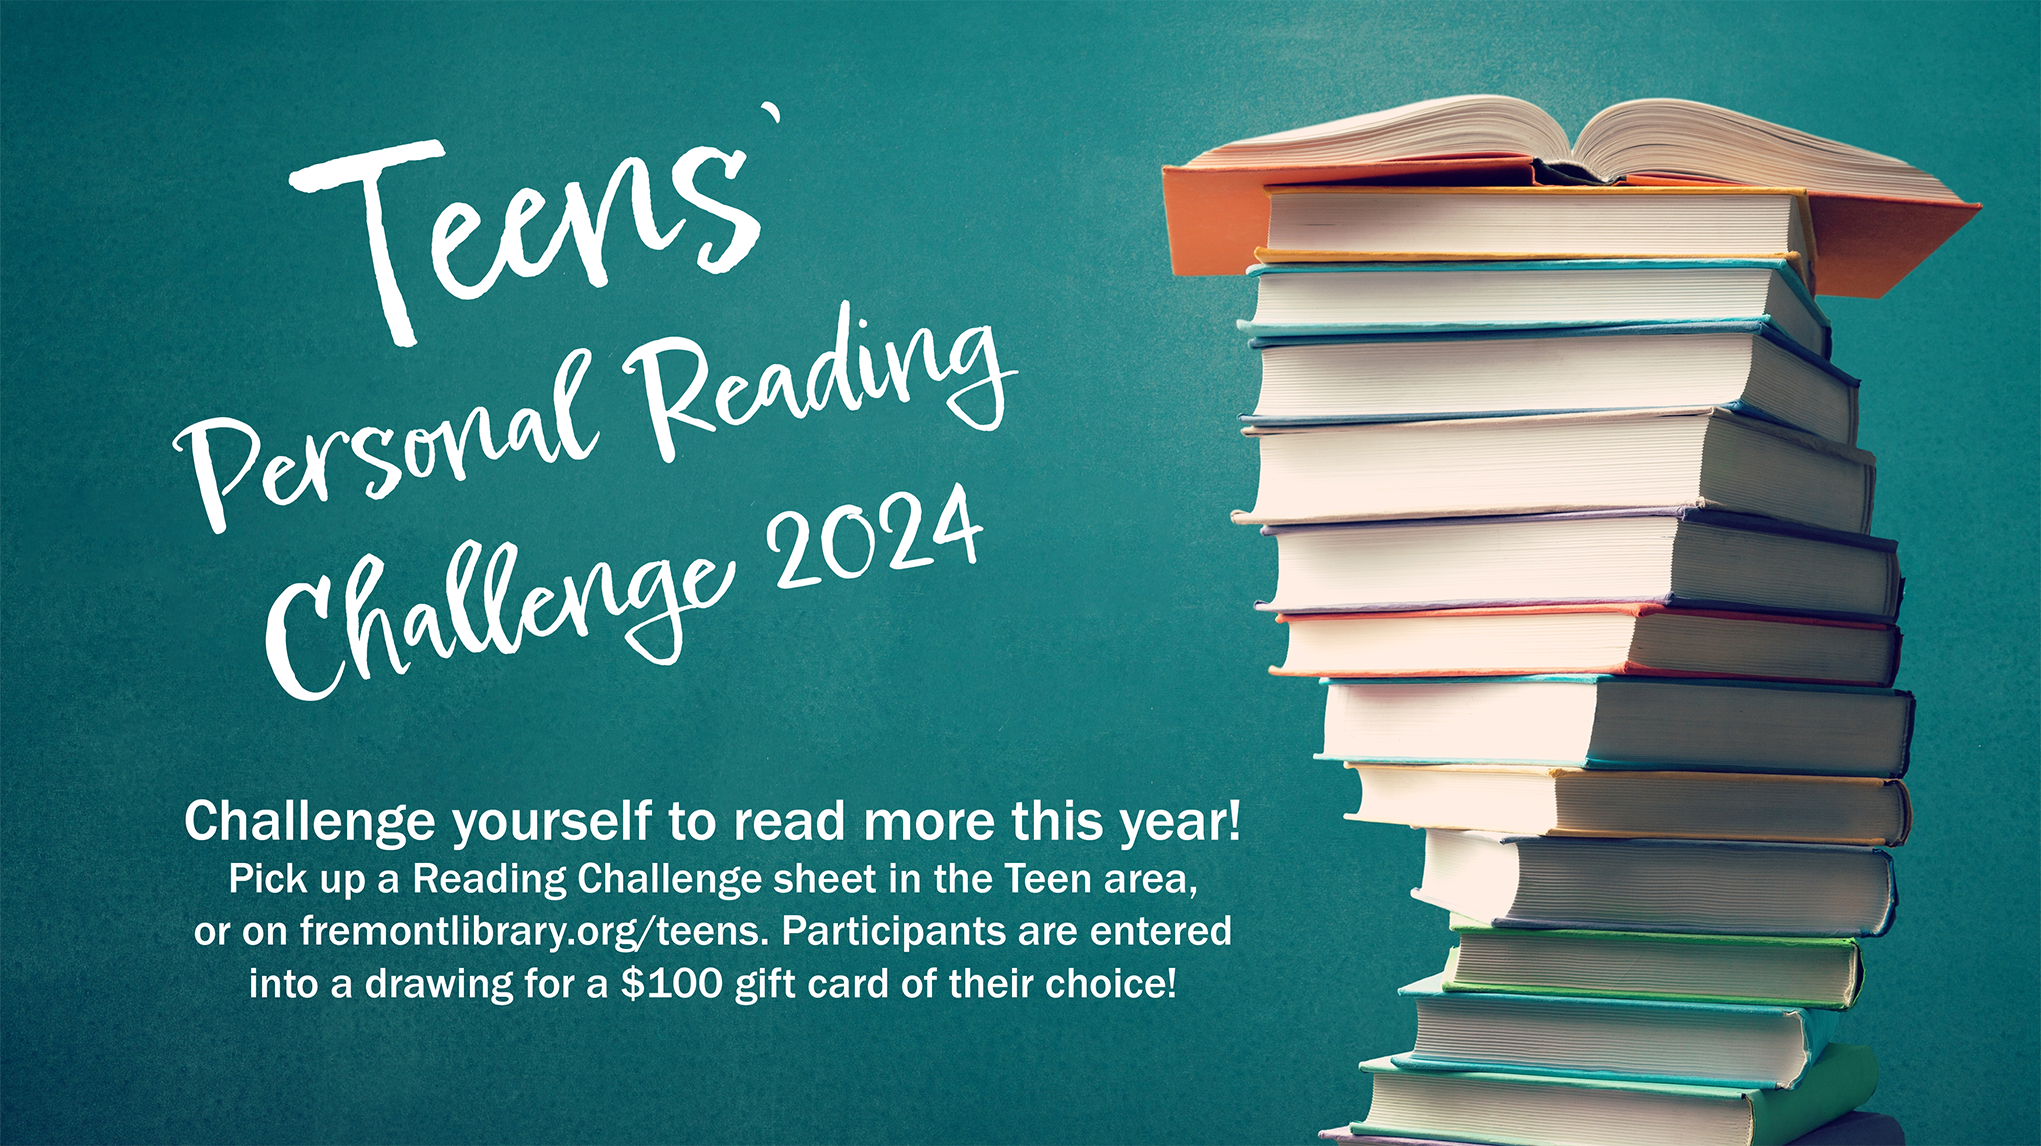 Read books in 2024 and you could win $100! Download the Teens' Personal Reading Challenge and print it at home or pick one up from the Youth Services desk. Receive an entry for every 5 books you read.